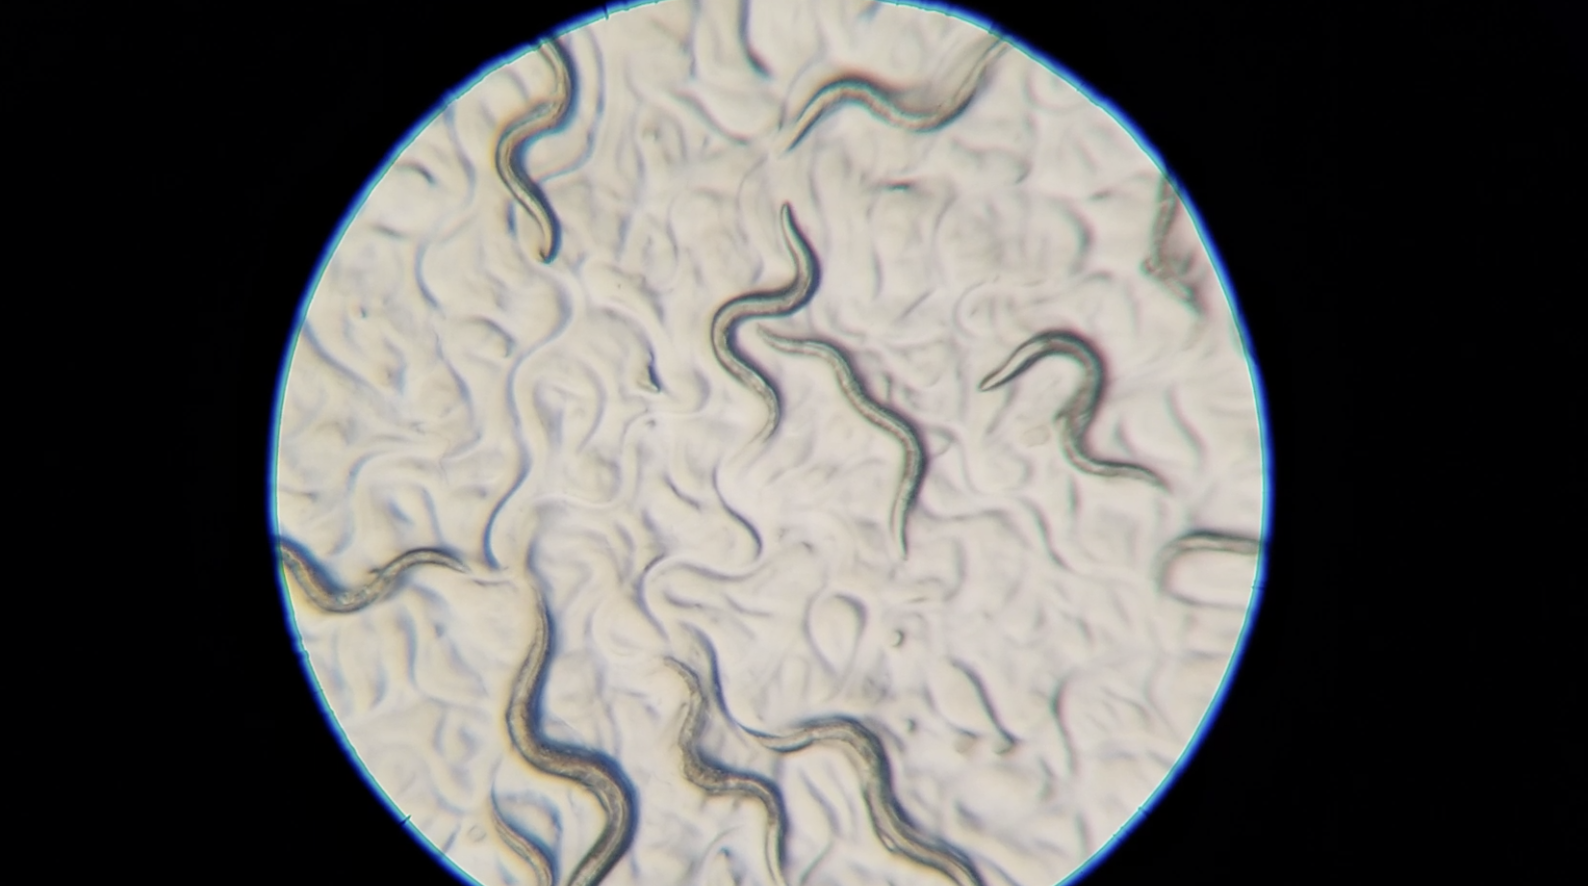 View through a microscope eyepiece shows worms squiggling across a petri dish